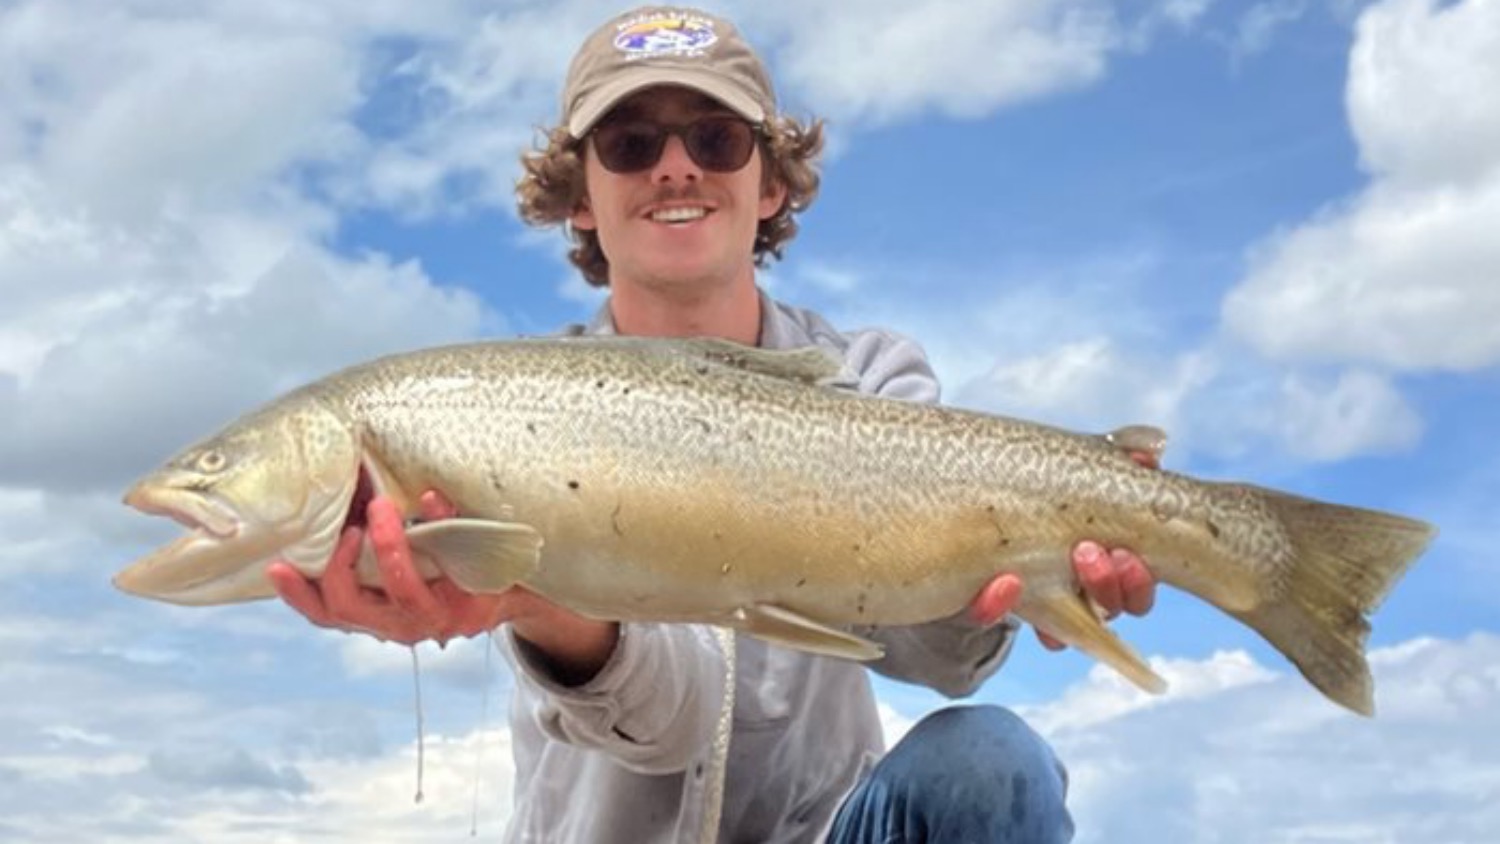 Wyoming Angler Lands State Record 12-Pound Tiger Trout